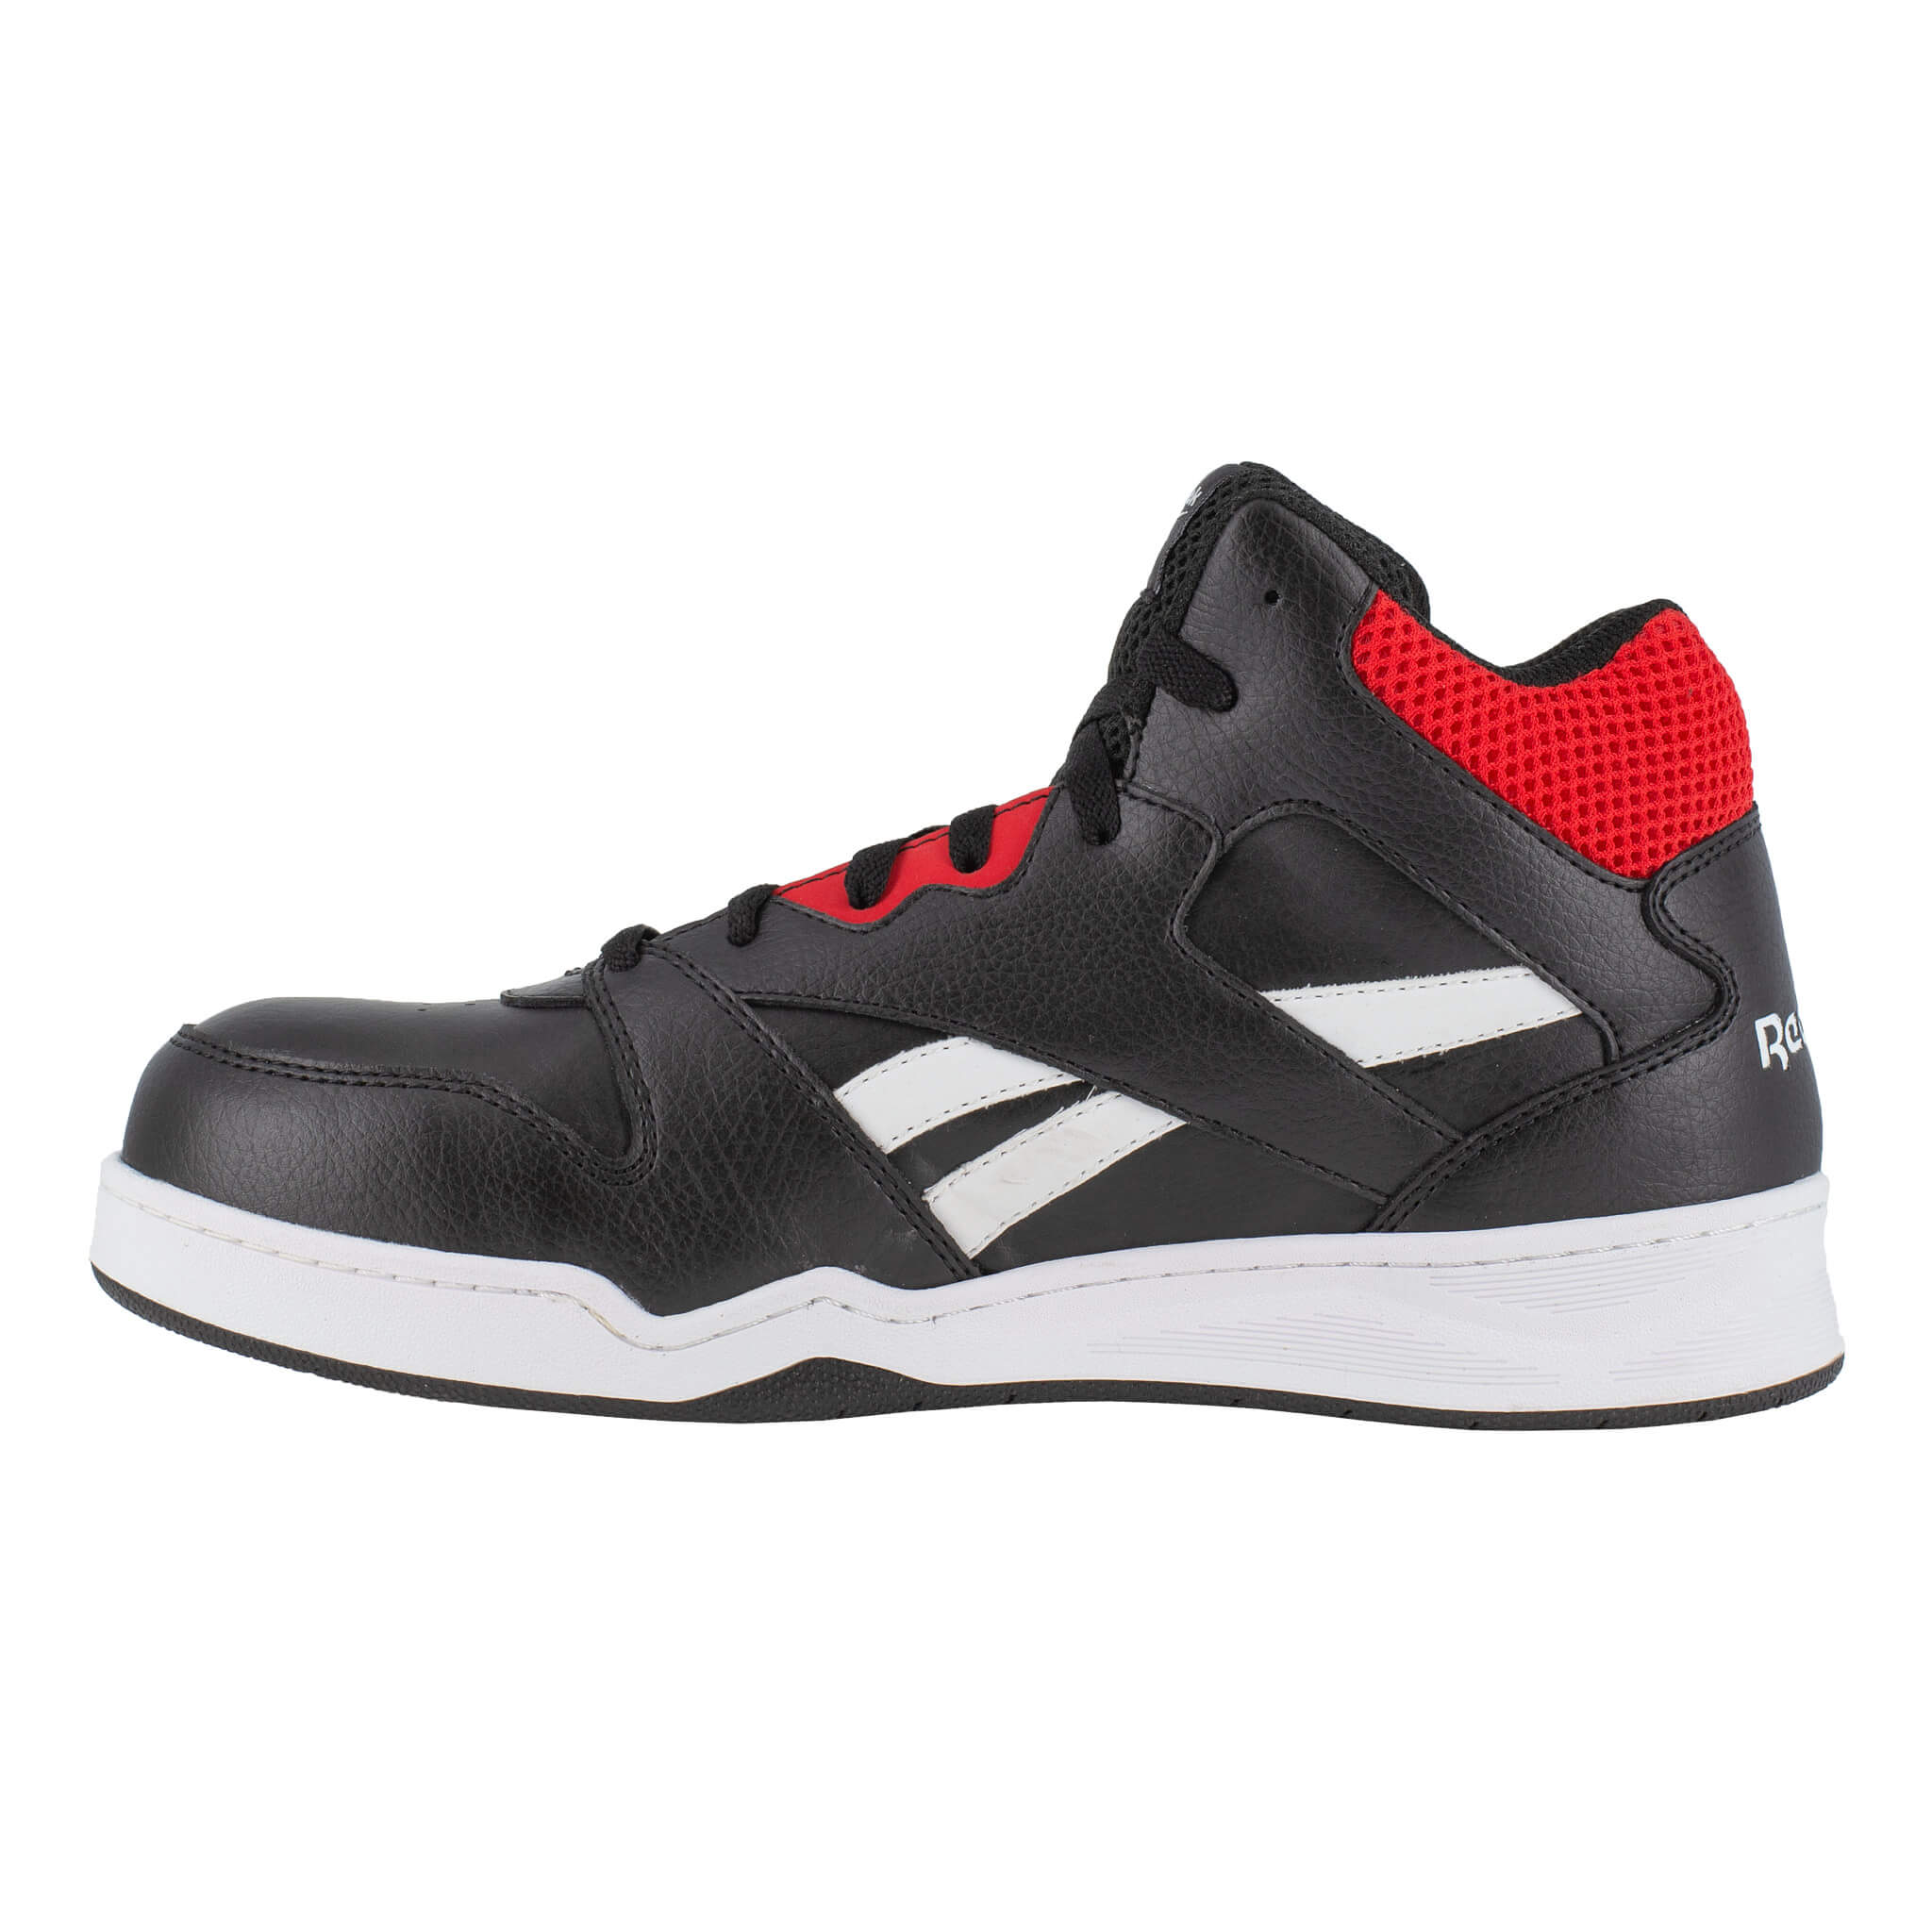 Reebok BLACK, WHITE AND RED HIGH TOP WORK SNEAKER 47 IB4132 S3 ESD SRC